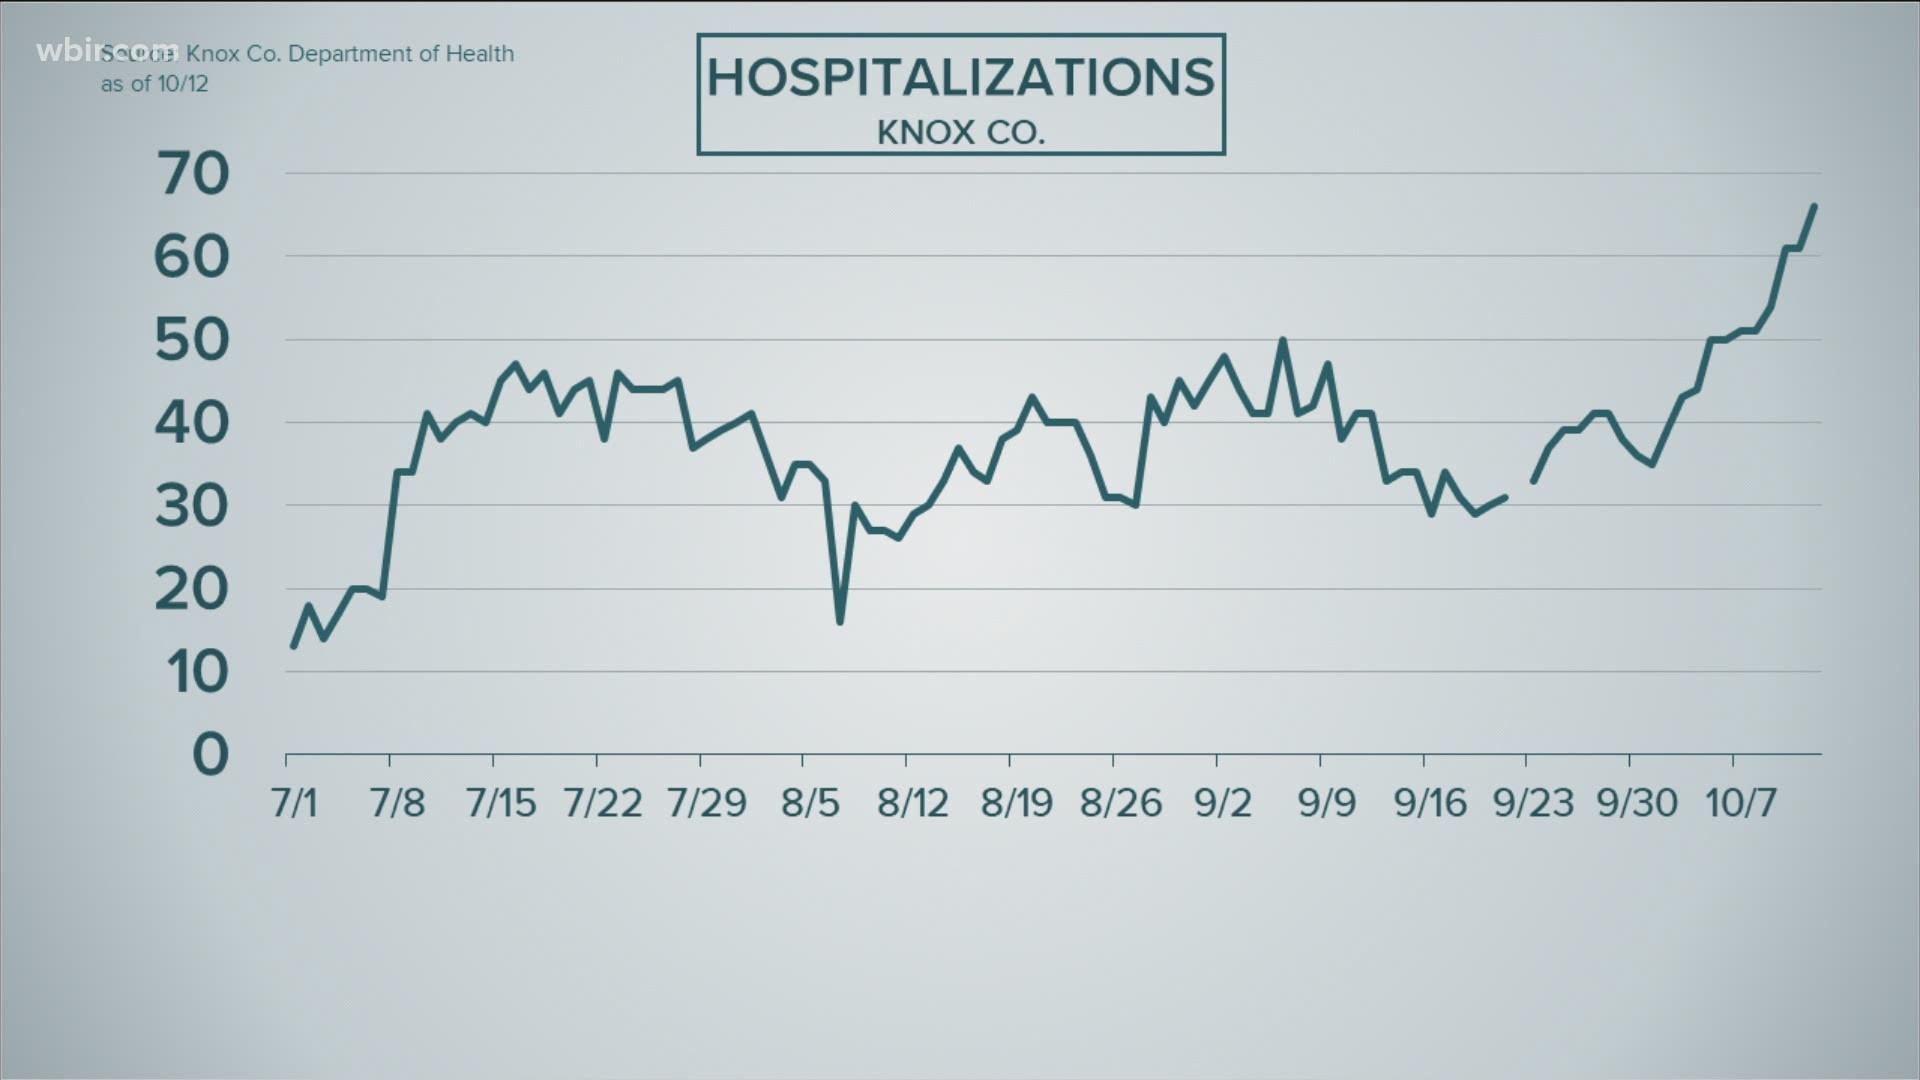 On Monday, Oct. 12, 2020, Knox County reported 66 hospitalizations.